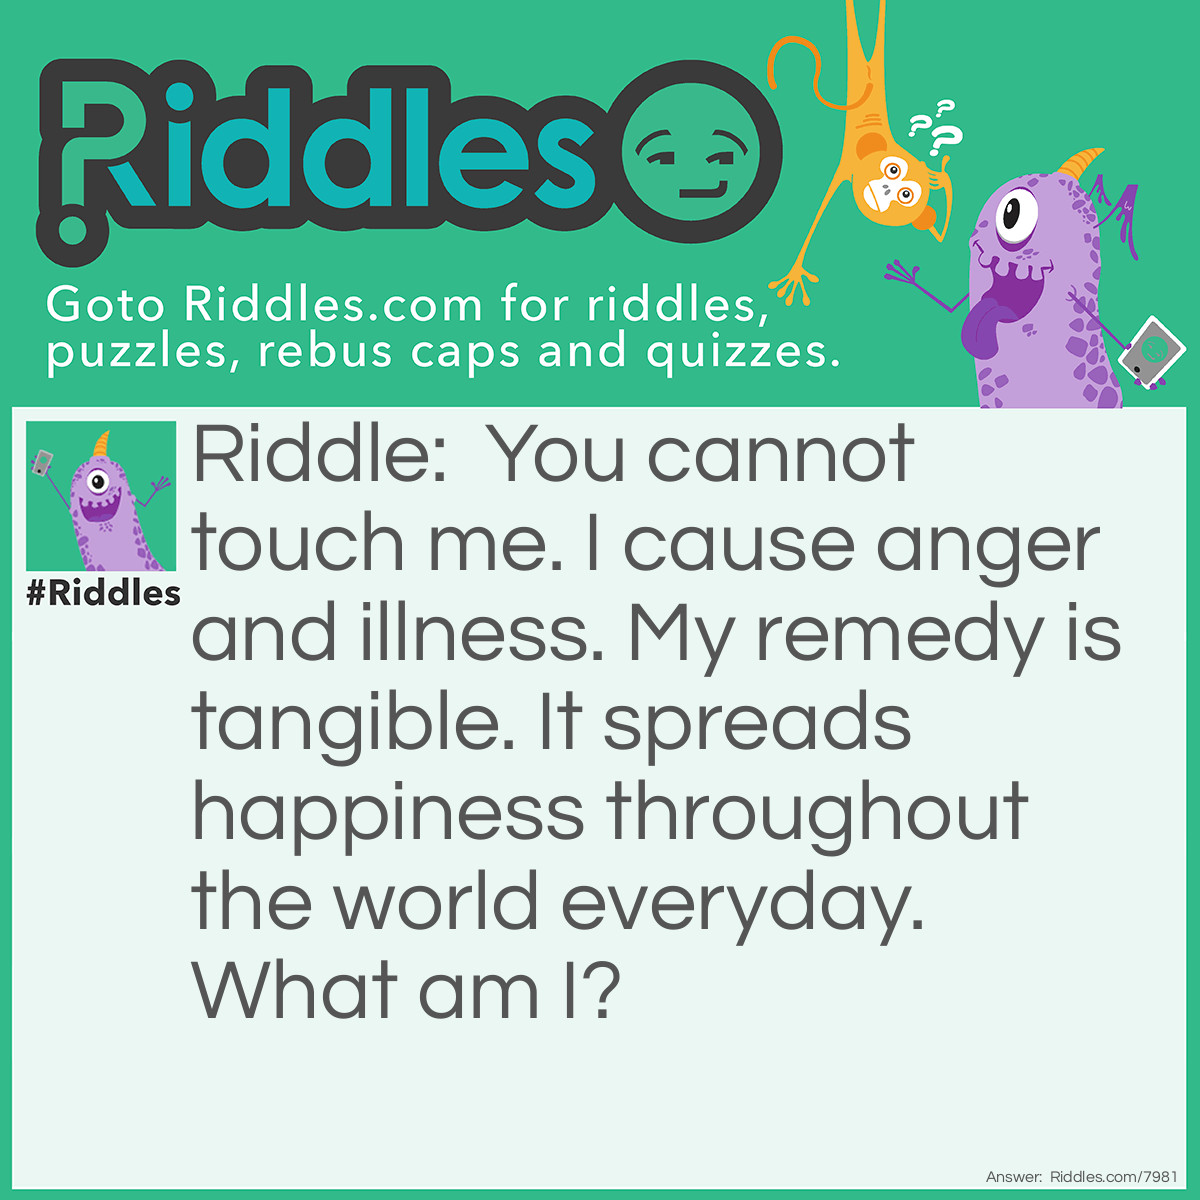 Riddle: You cannot touch me. I cause anger and illness. My remedy is tangible. It spreads happiness throughout the world everyday. What am I? Answer: Hunger. Food.